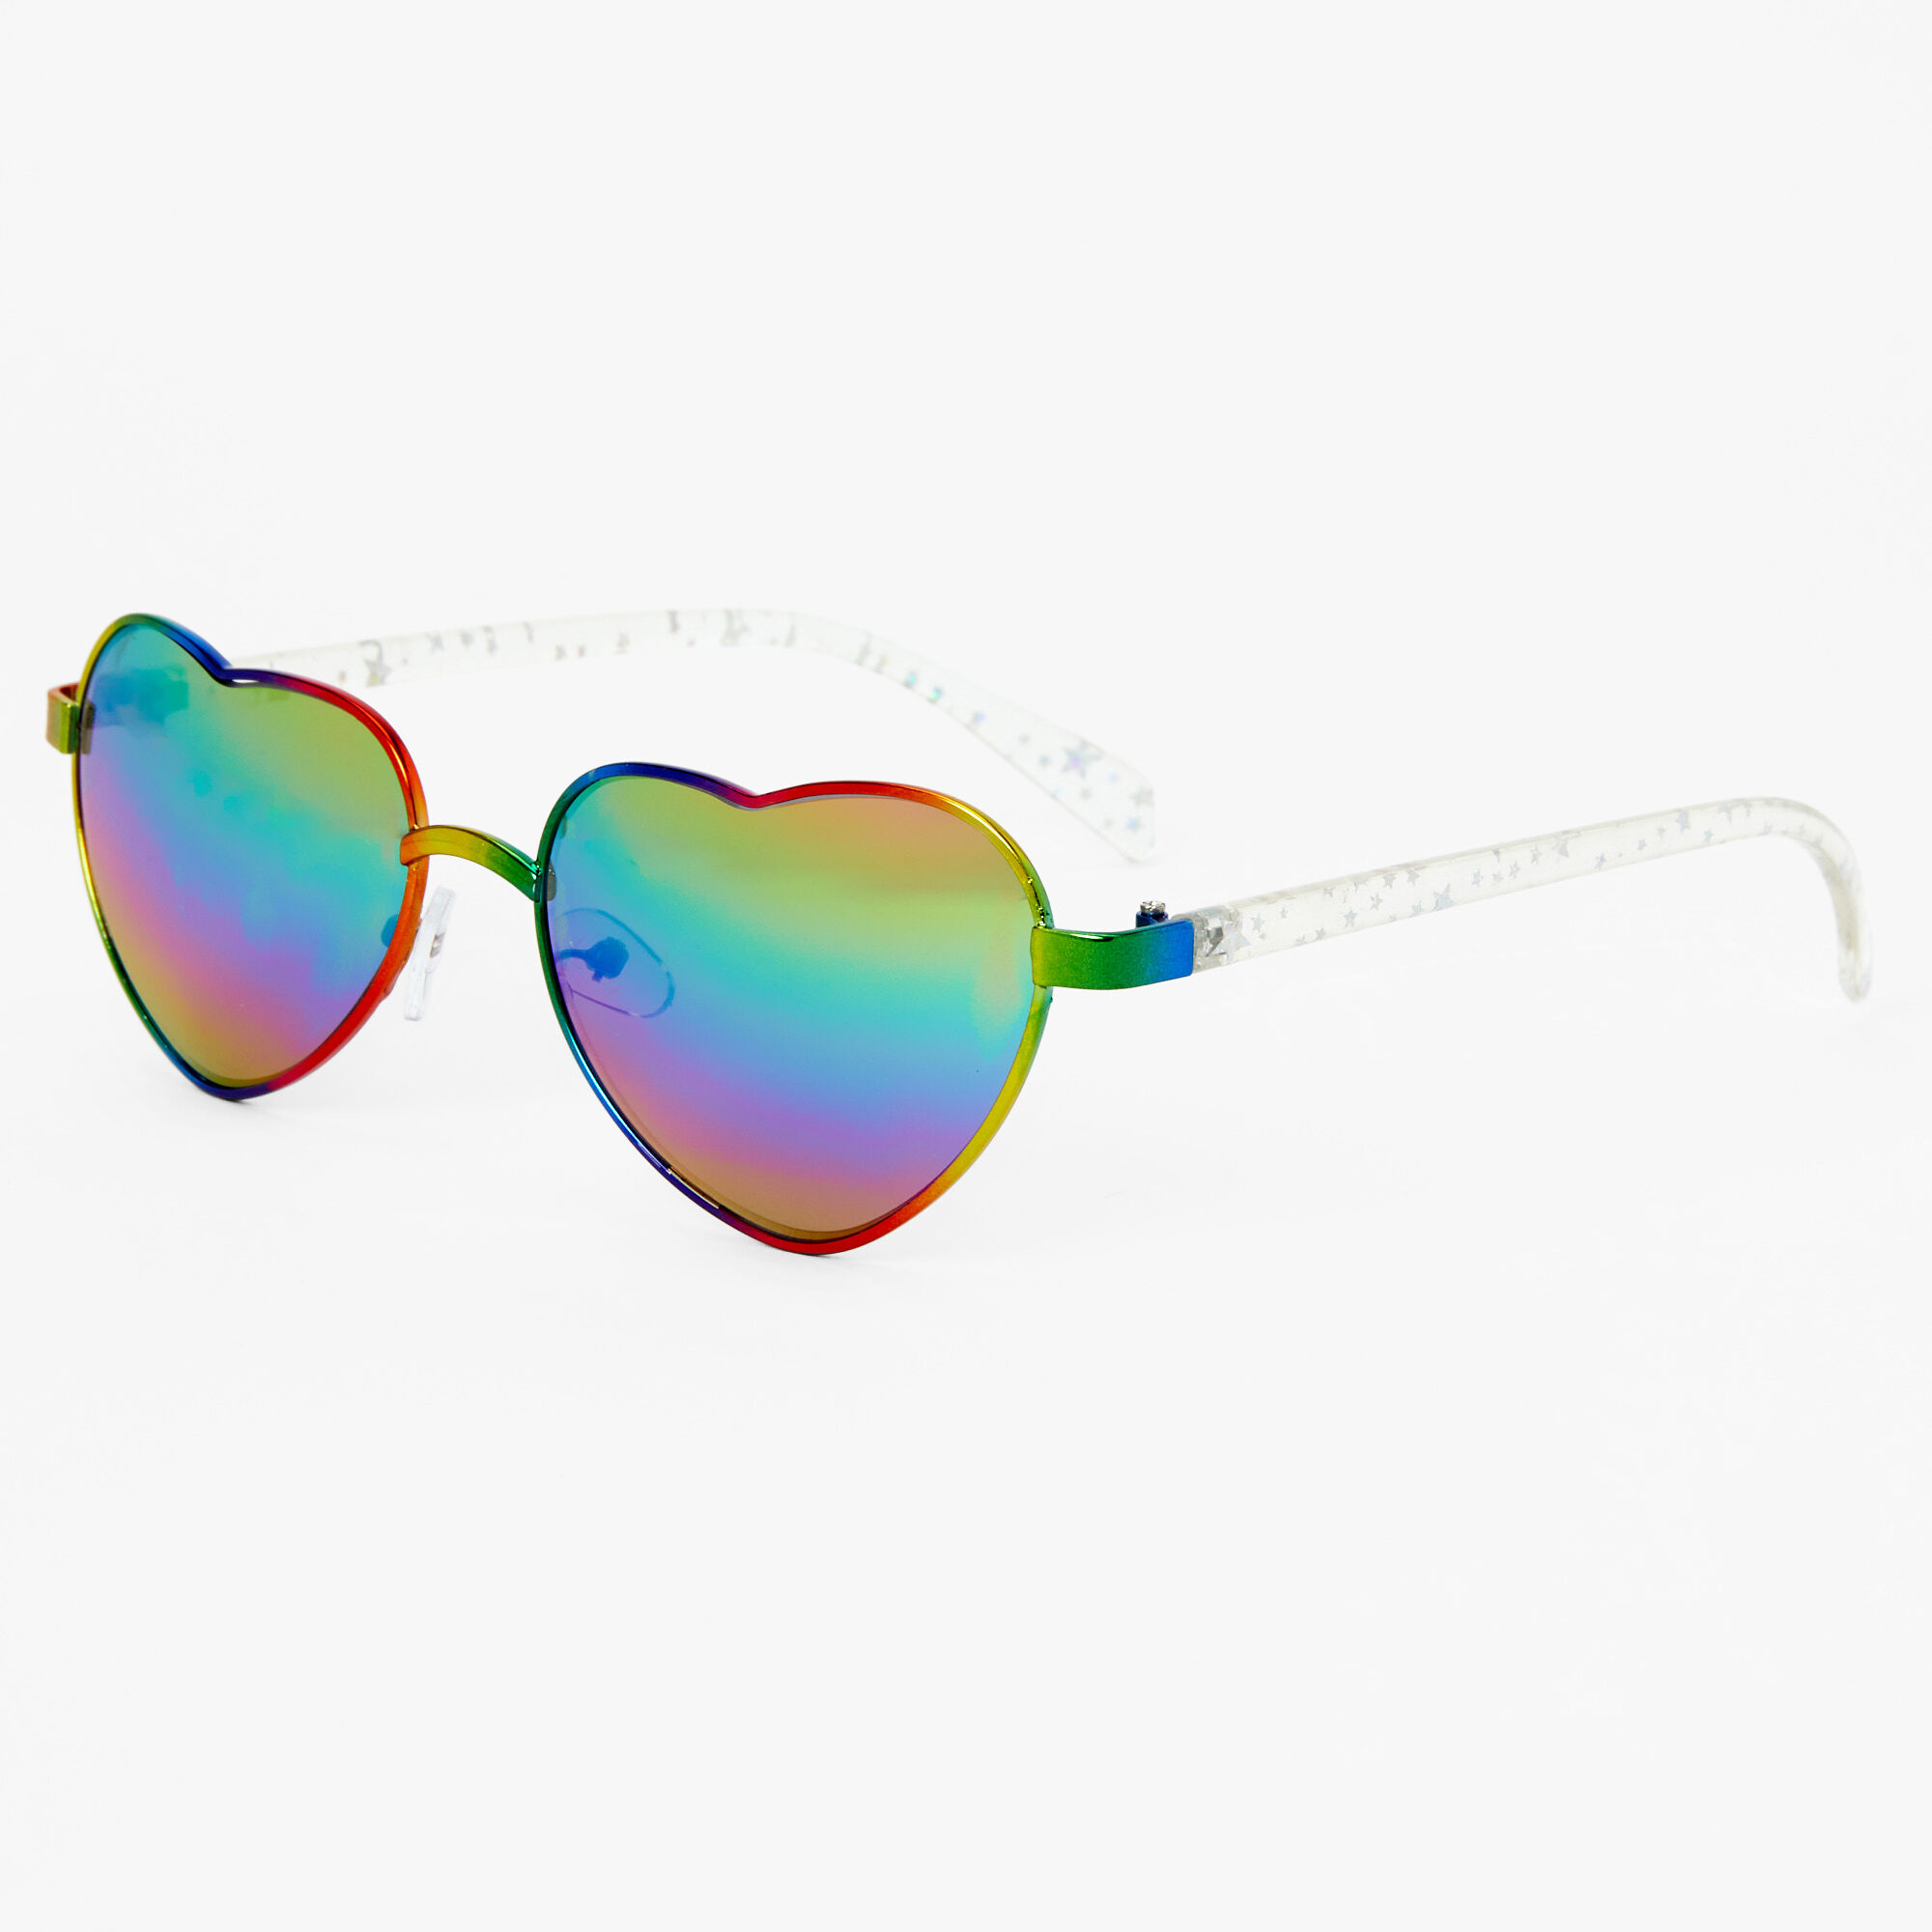 View Claires Club Anodized Heart Aviator Sunglasses Rainbow information